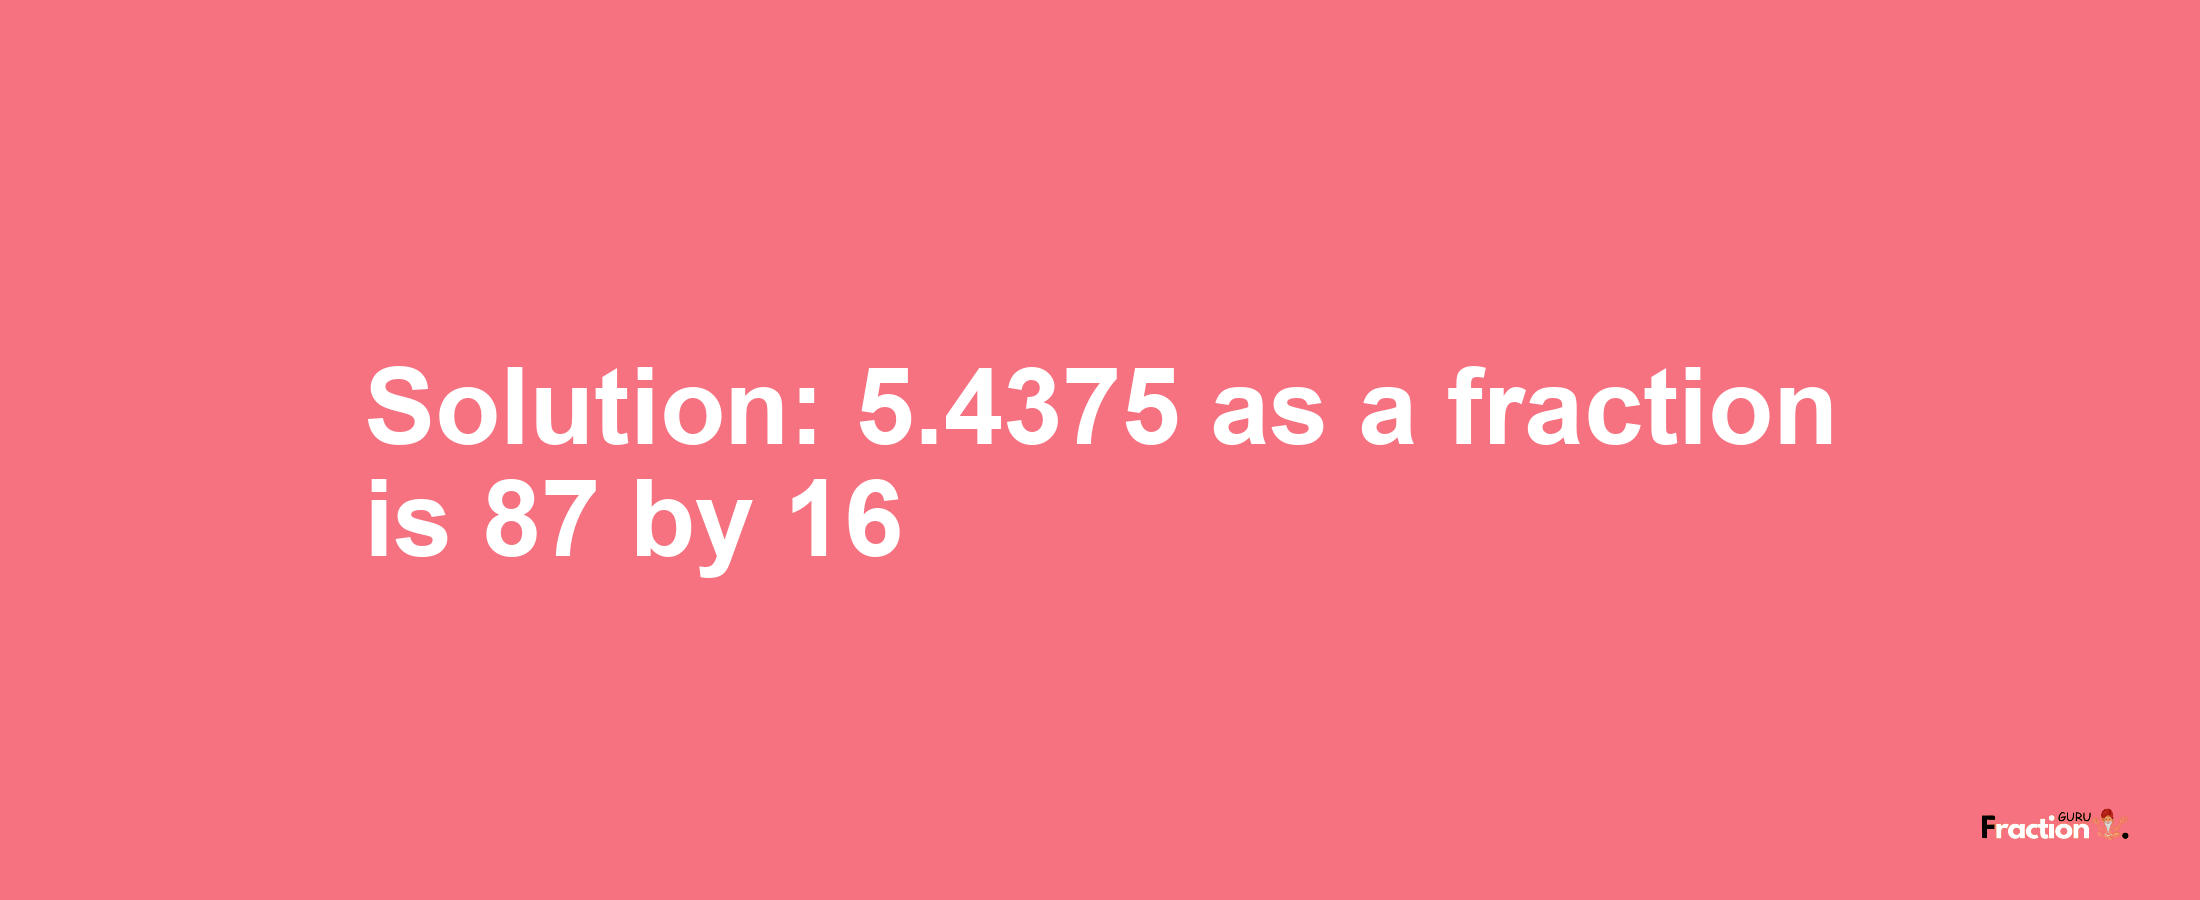 Solution:5.4375 as a fraction is 87/16